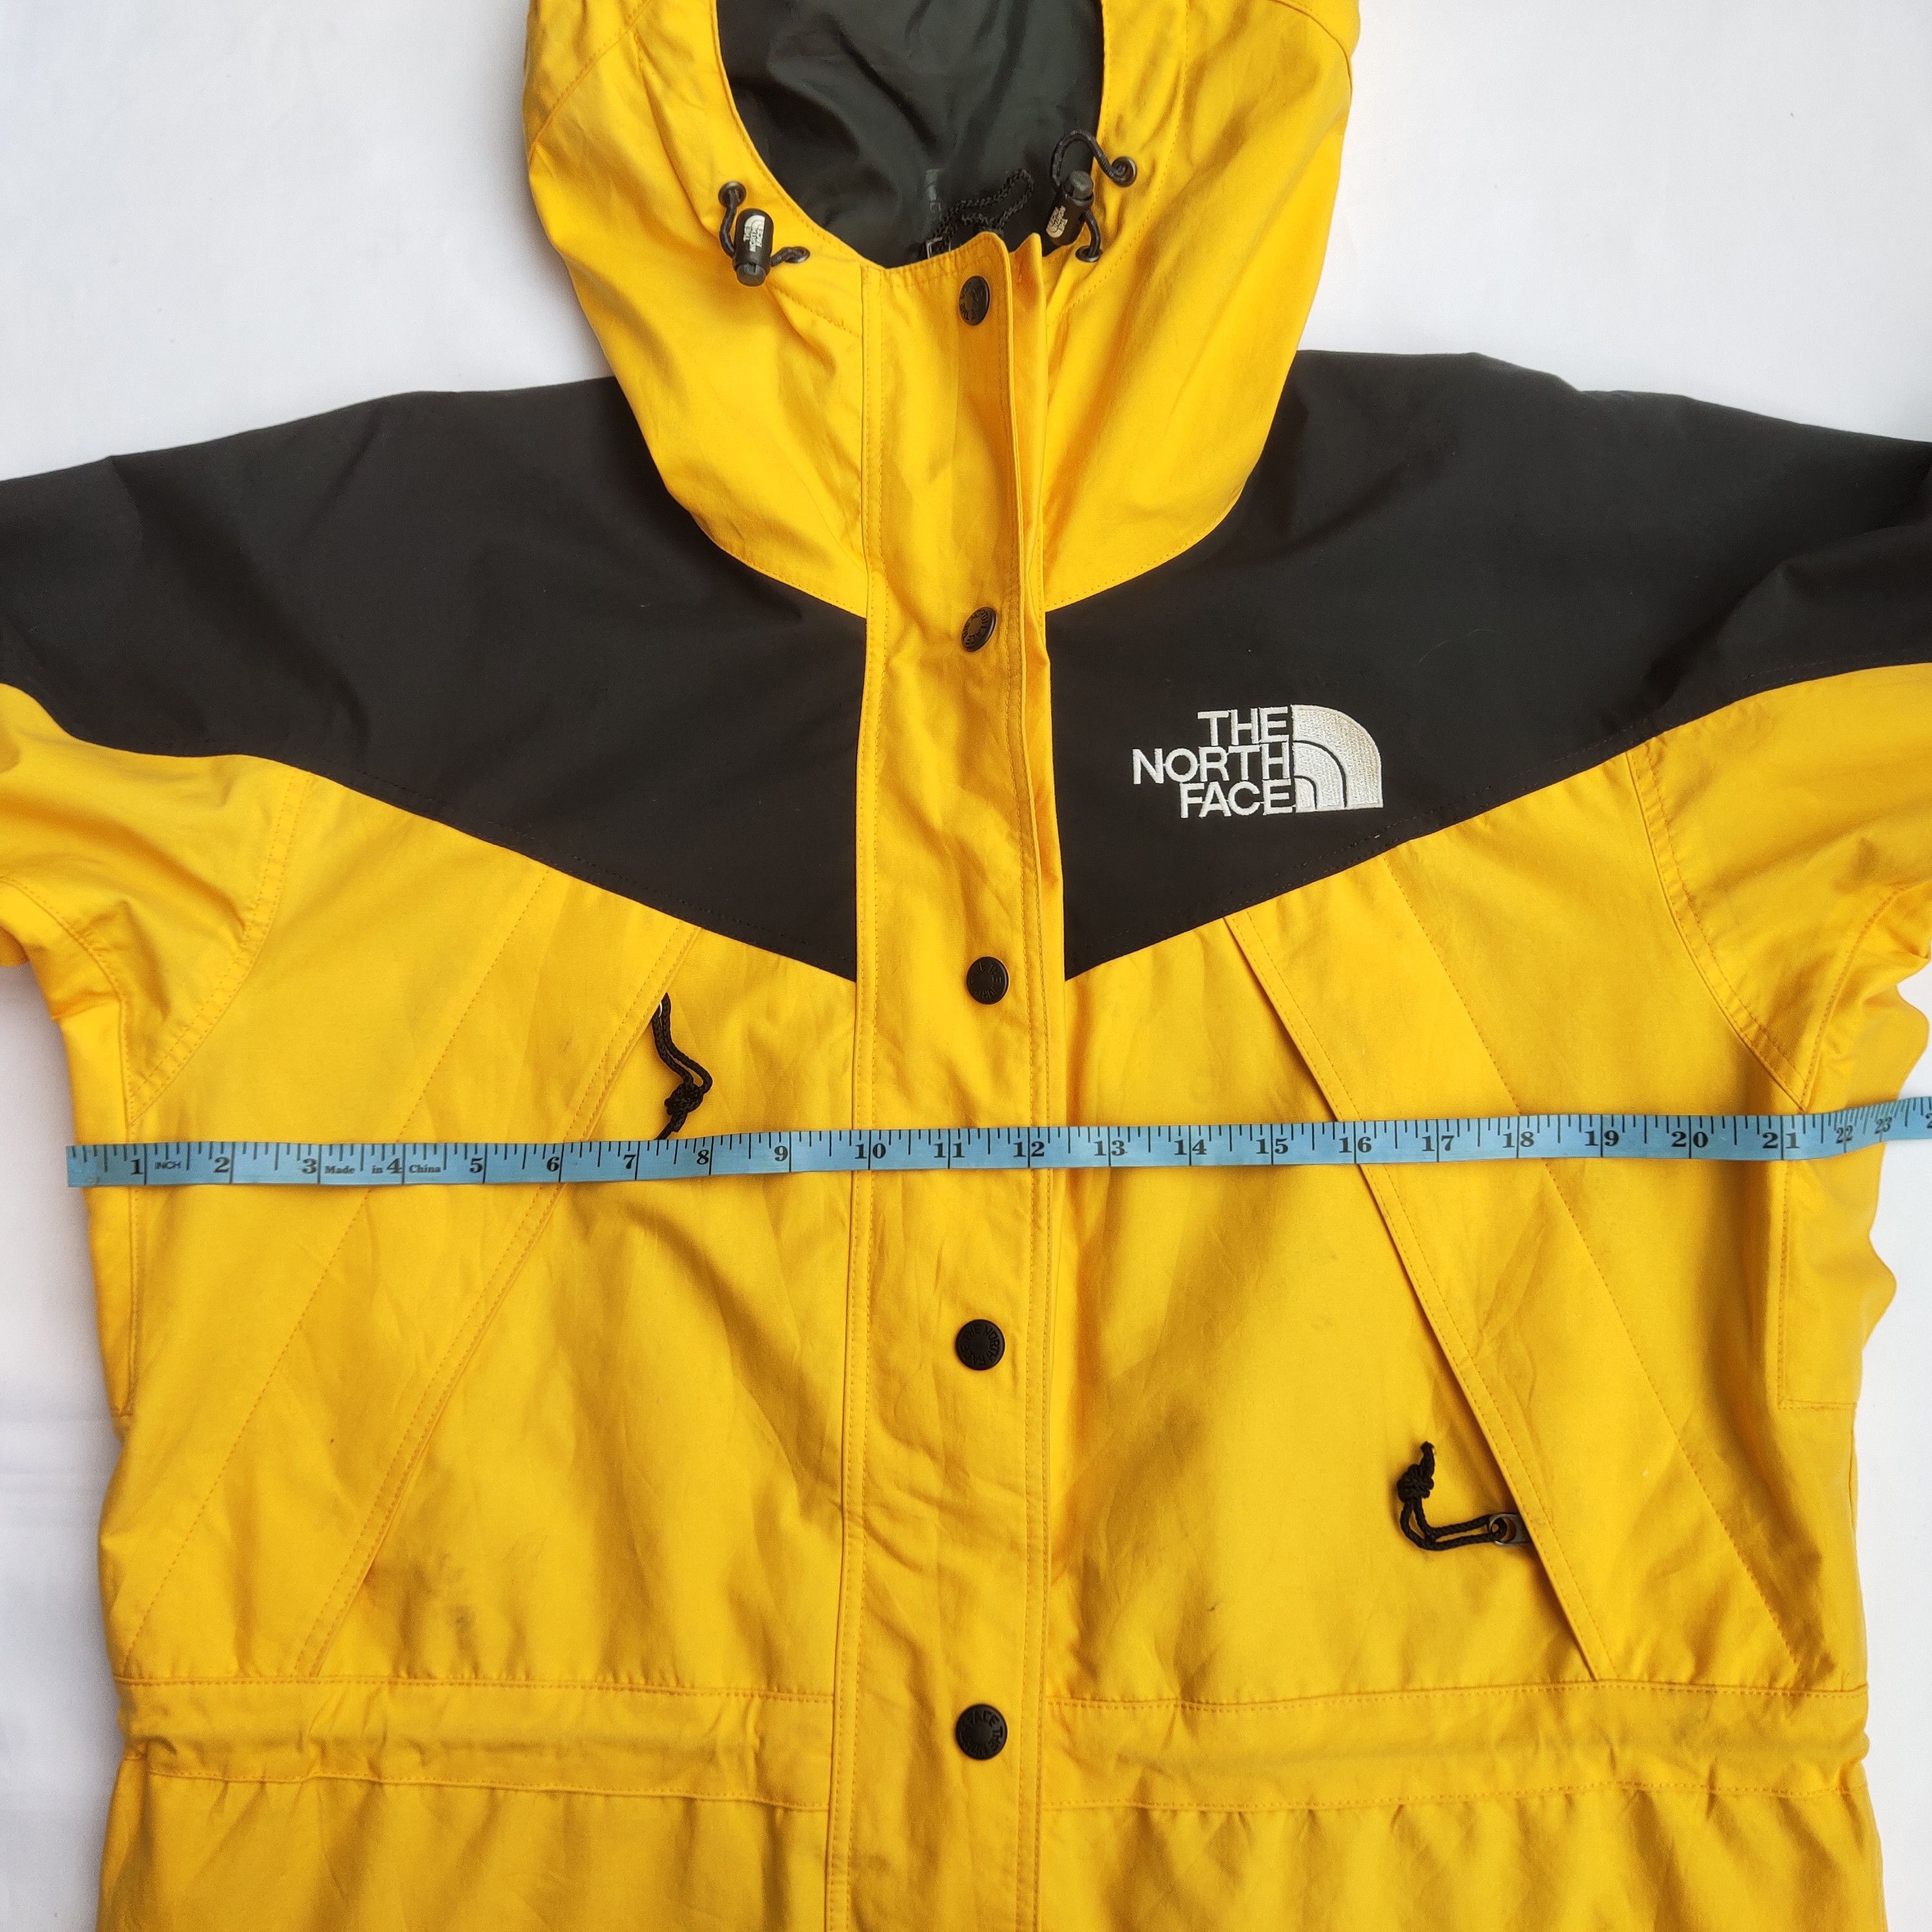 The North Face Vintage North Face Gore-Tex Yellow Jacket Size US M / EU 48-50 / 2 - 9 Thumbnail